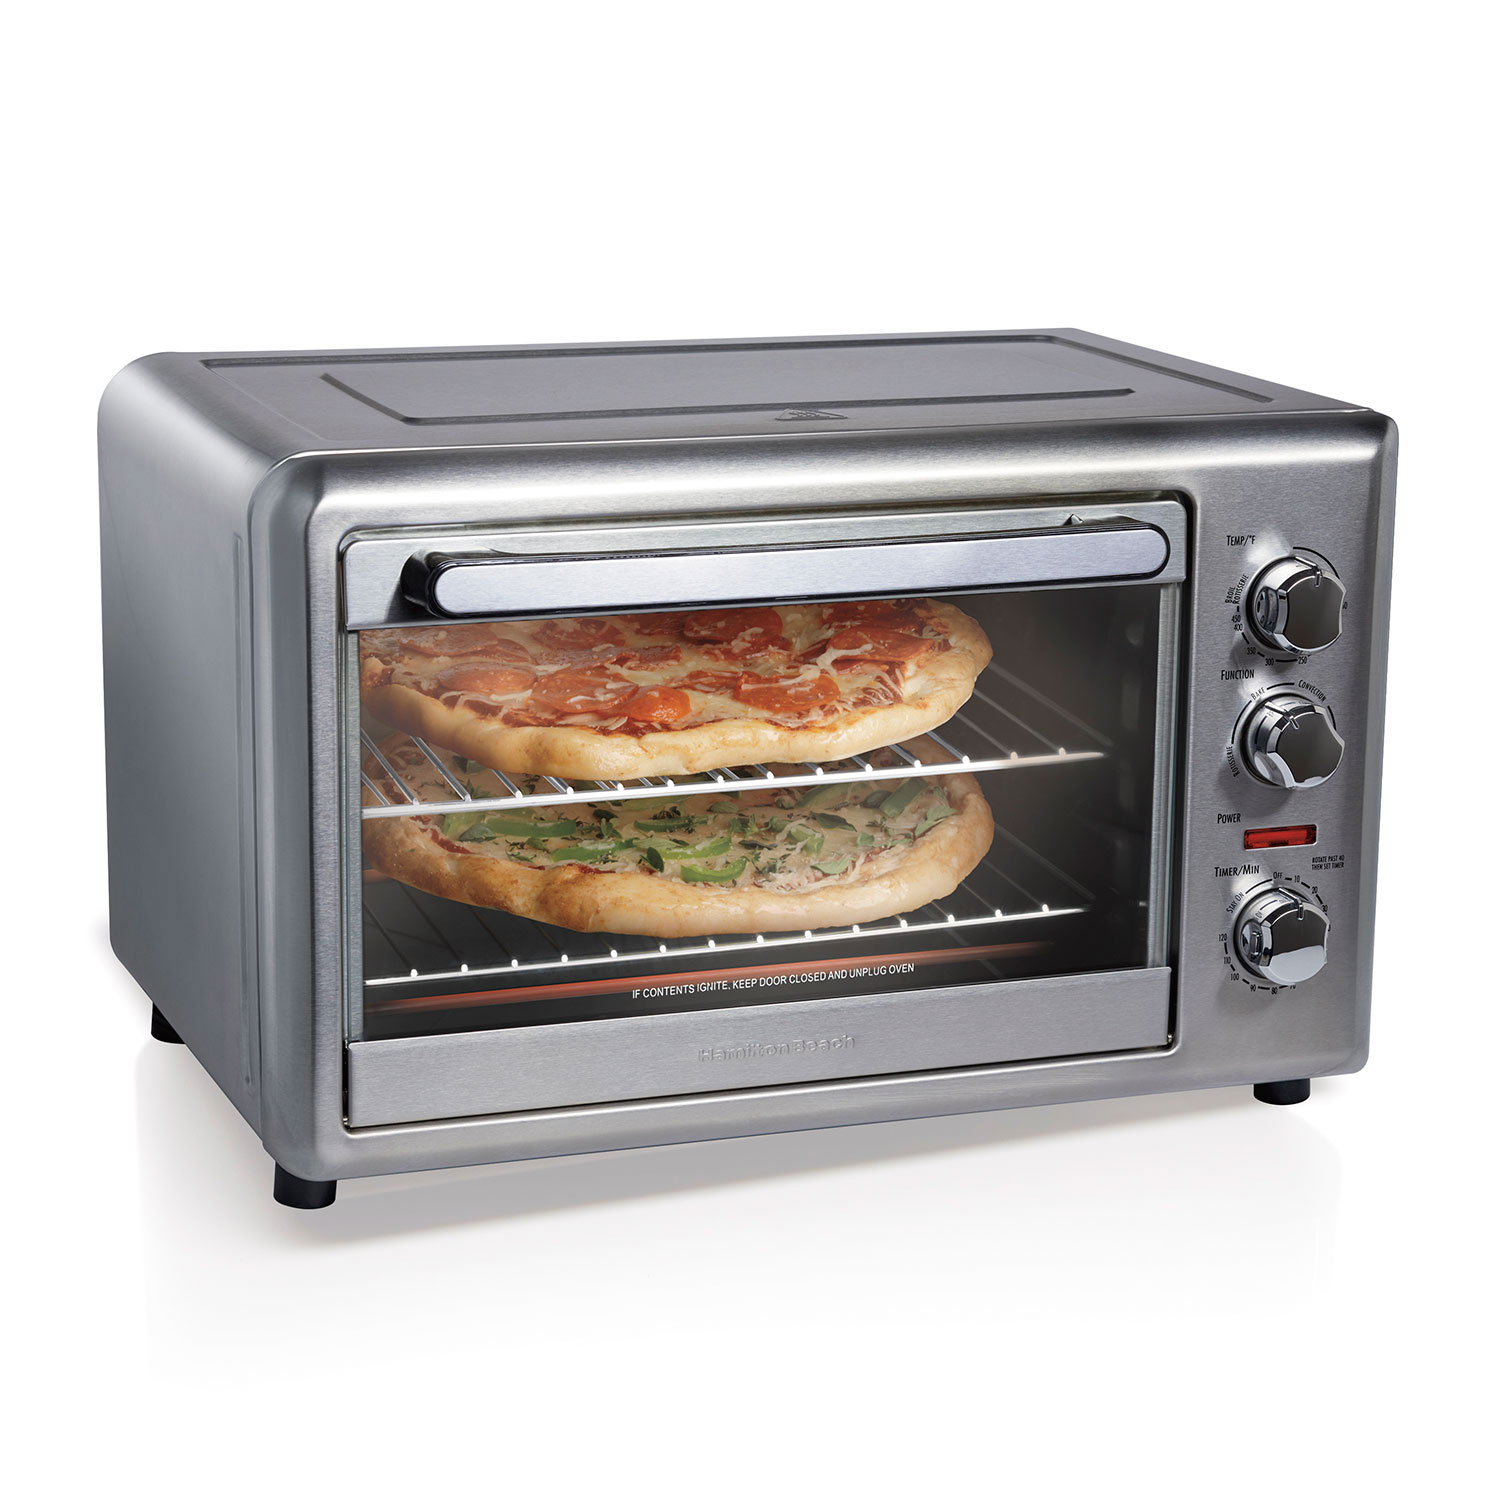 Countertop Oven with Convection and Rotisserie (31106)